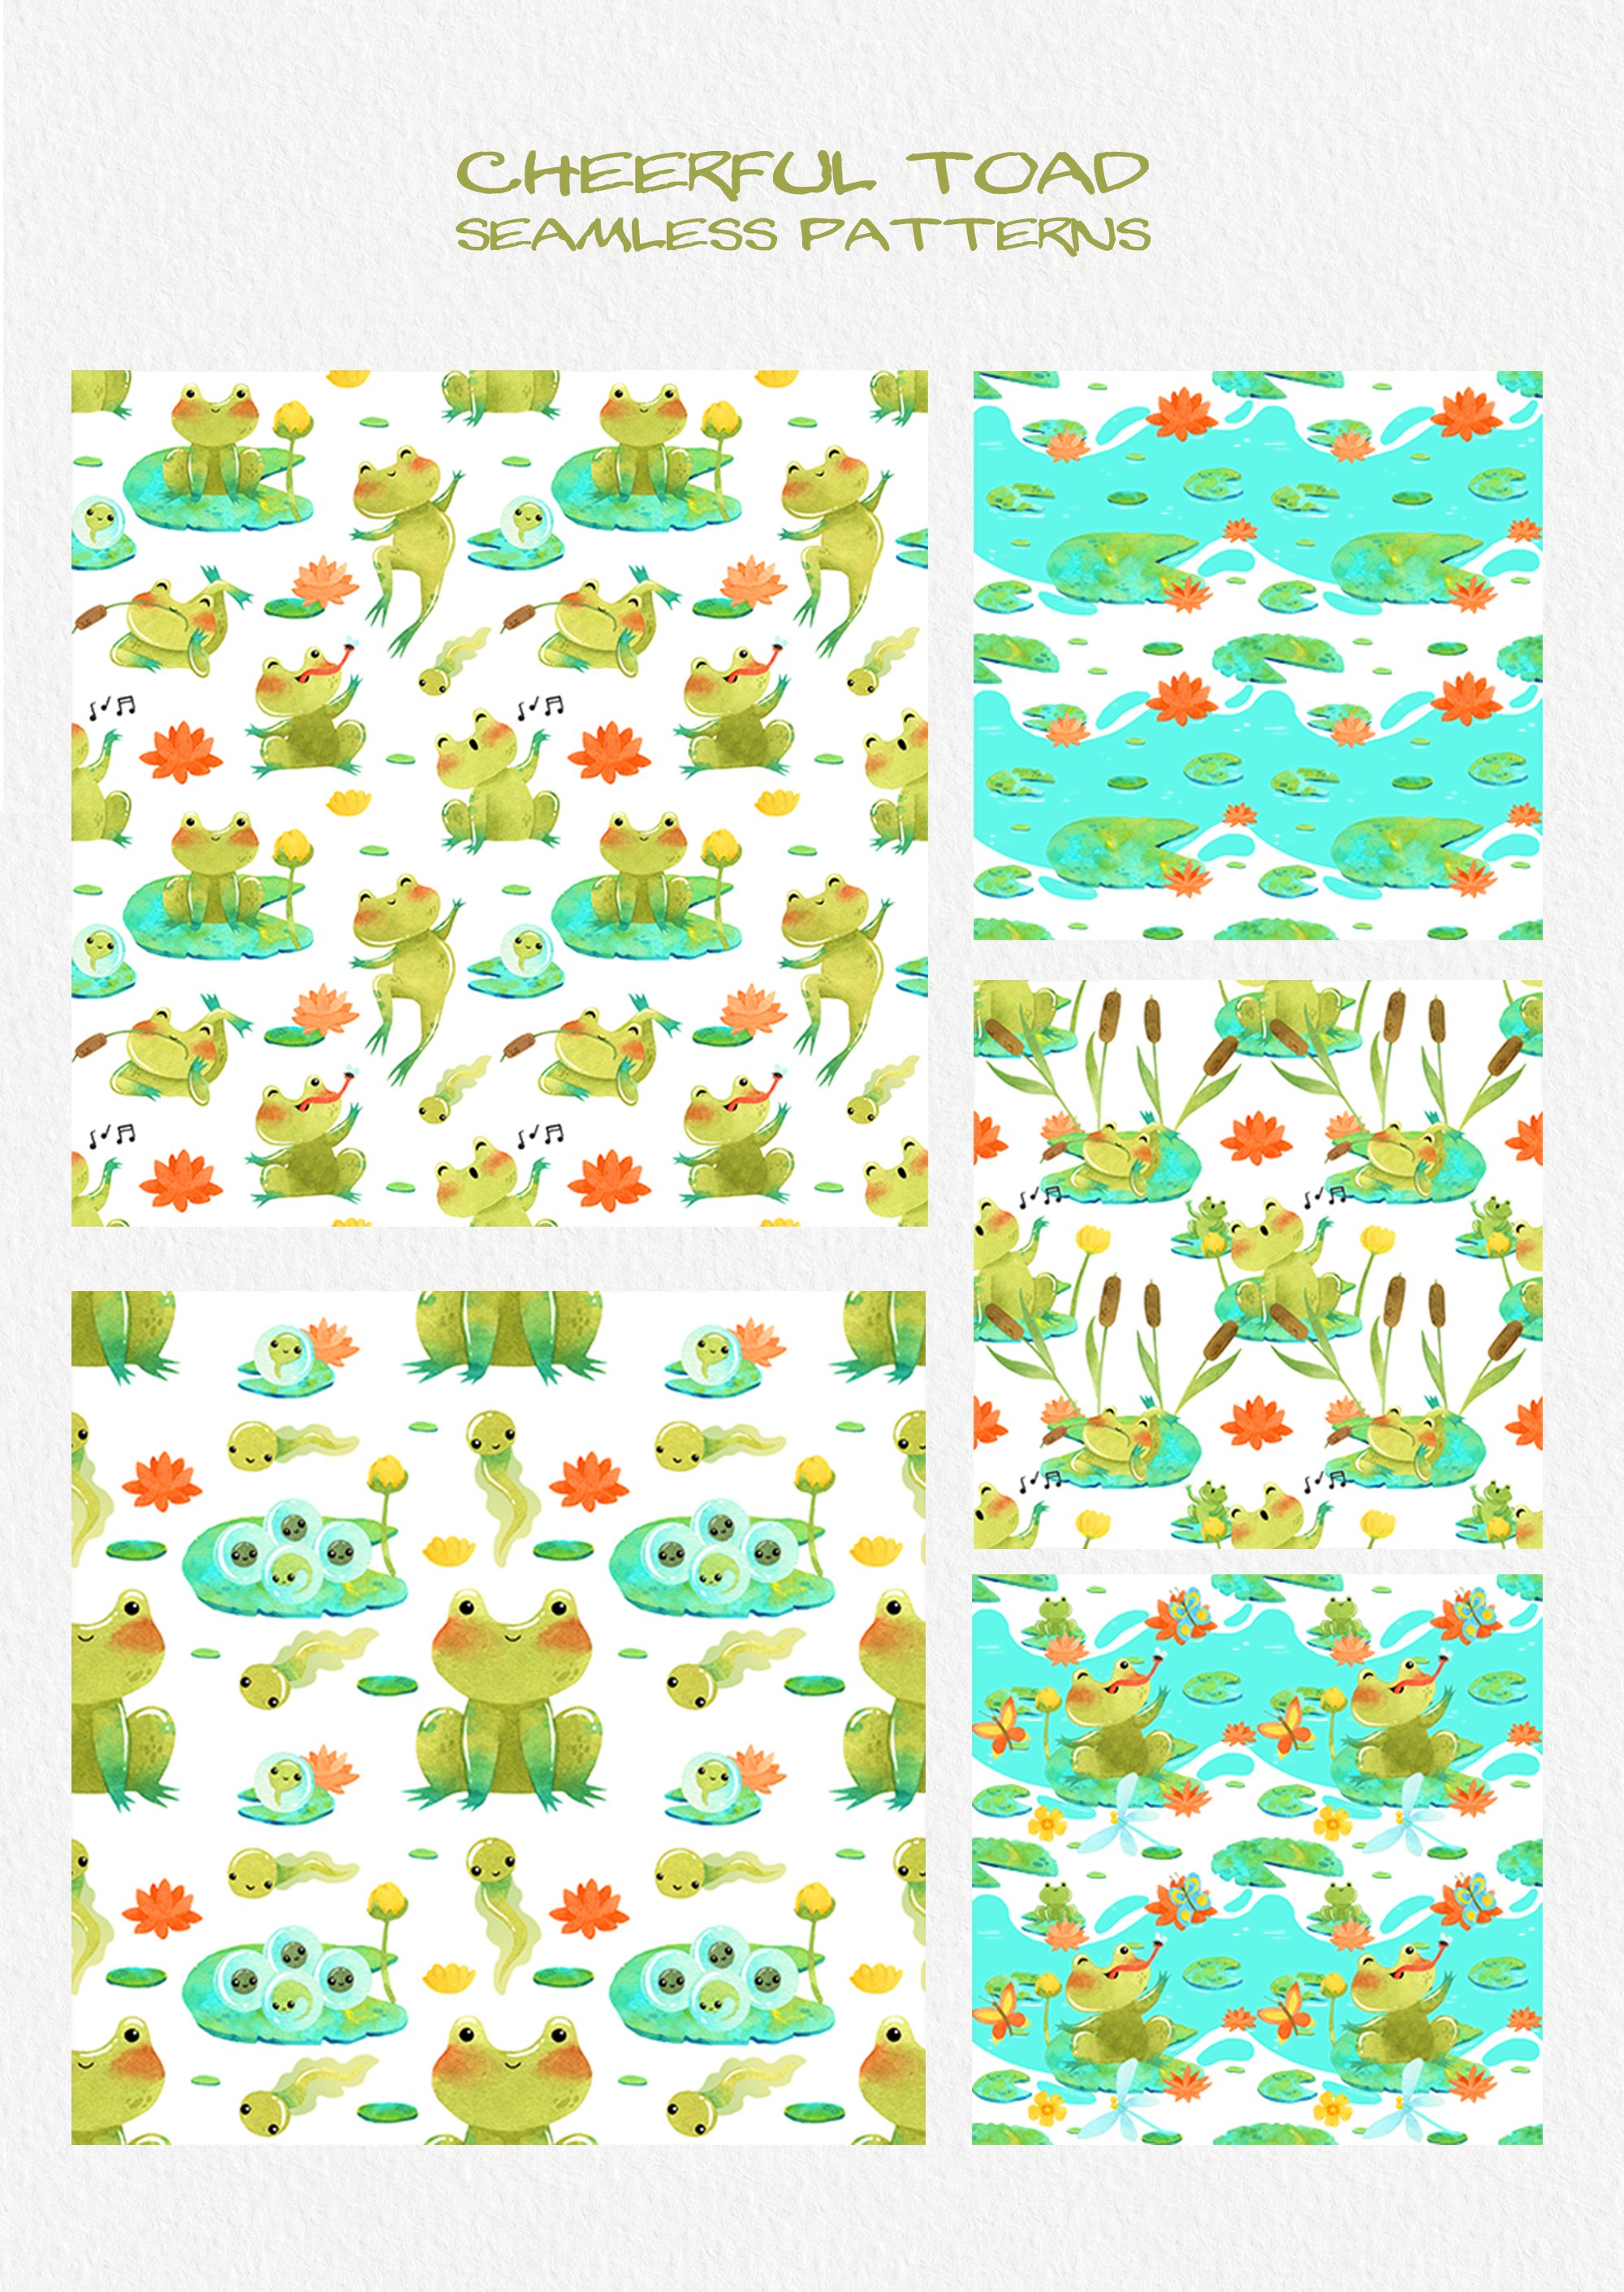 Cheerful Toad - Seamless Patterns.